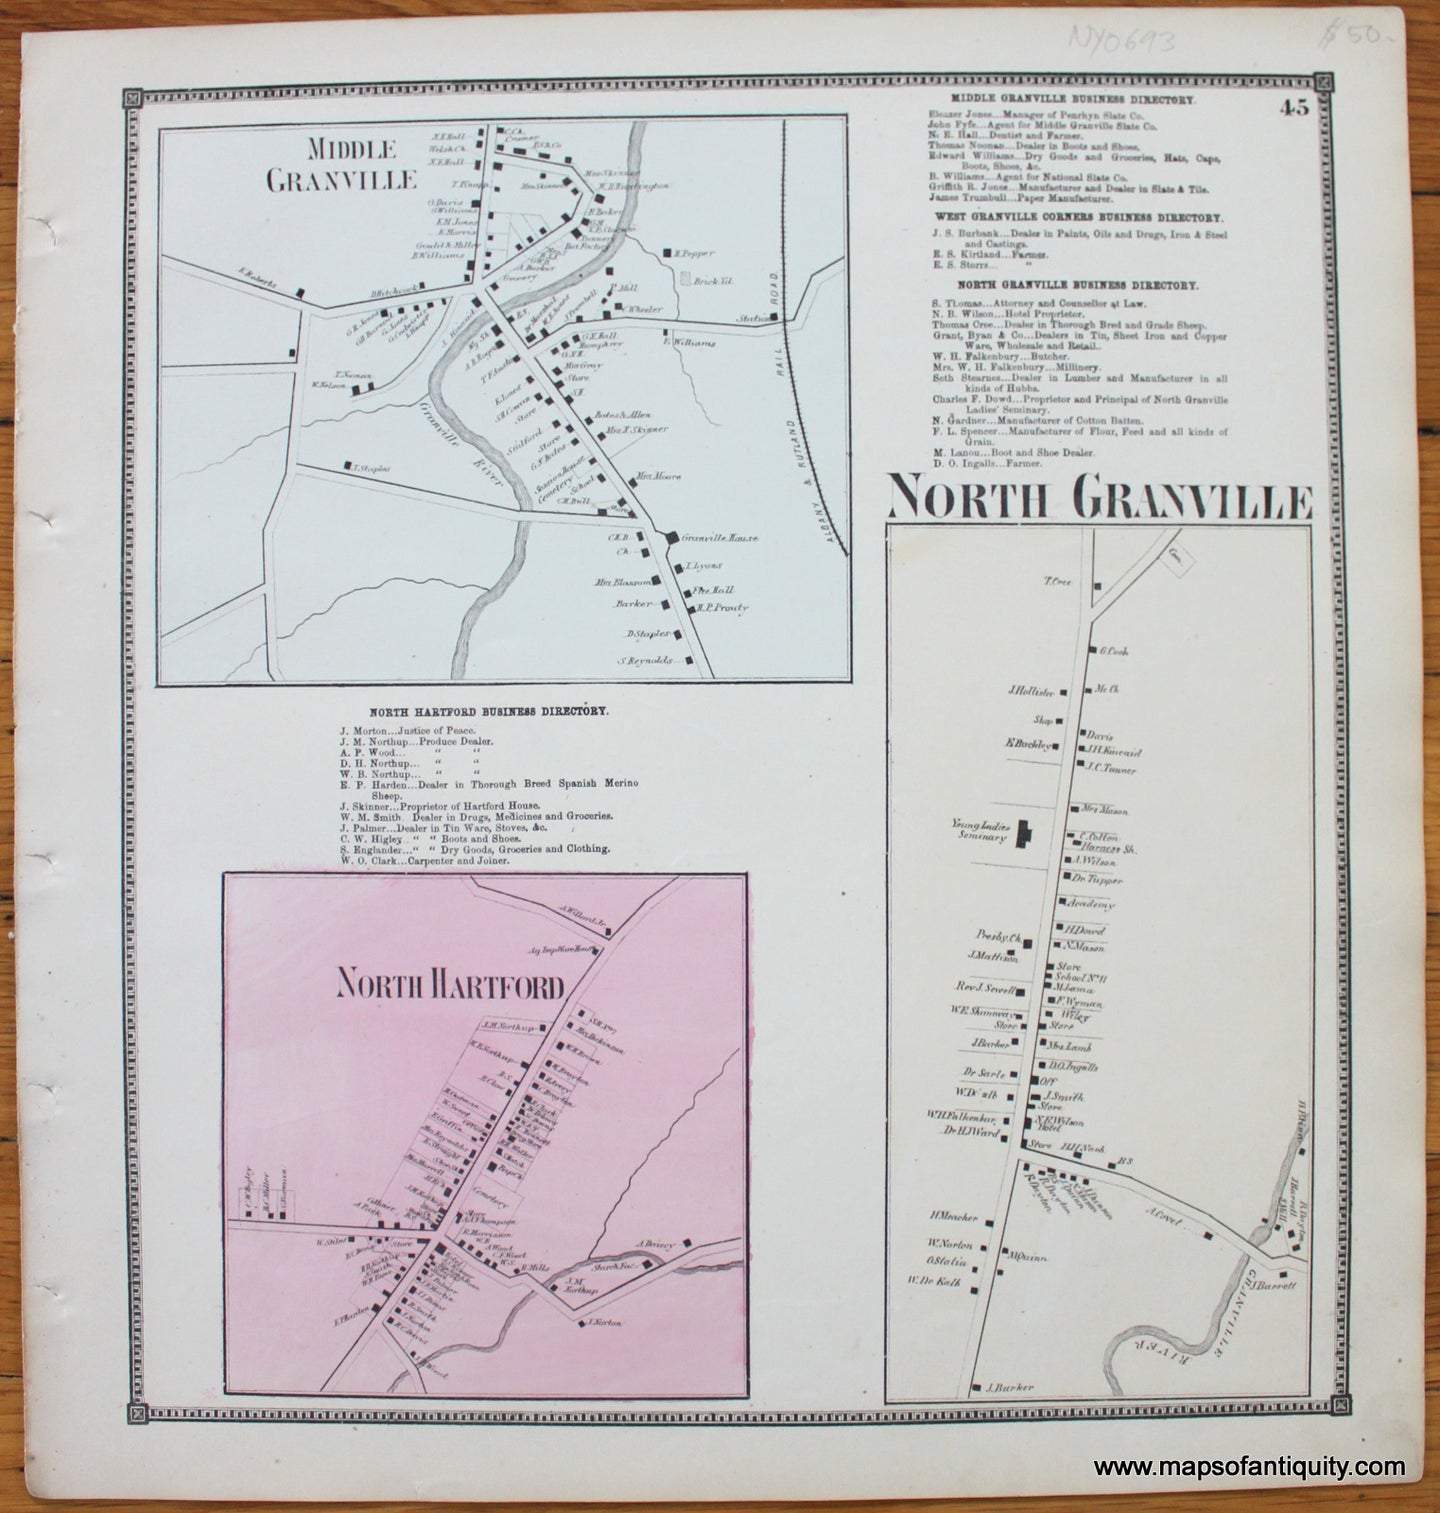 Antique-Map-Town-Towns-Middle-Granville-North-Granville-North-Hartford-New-Topographical-Atlas-of-Washington-County-New-York-by-Stone-and-Stewart-1866-1860s-1800s-Mid-Late-19th-Century-Maps-of-Antiquity-